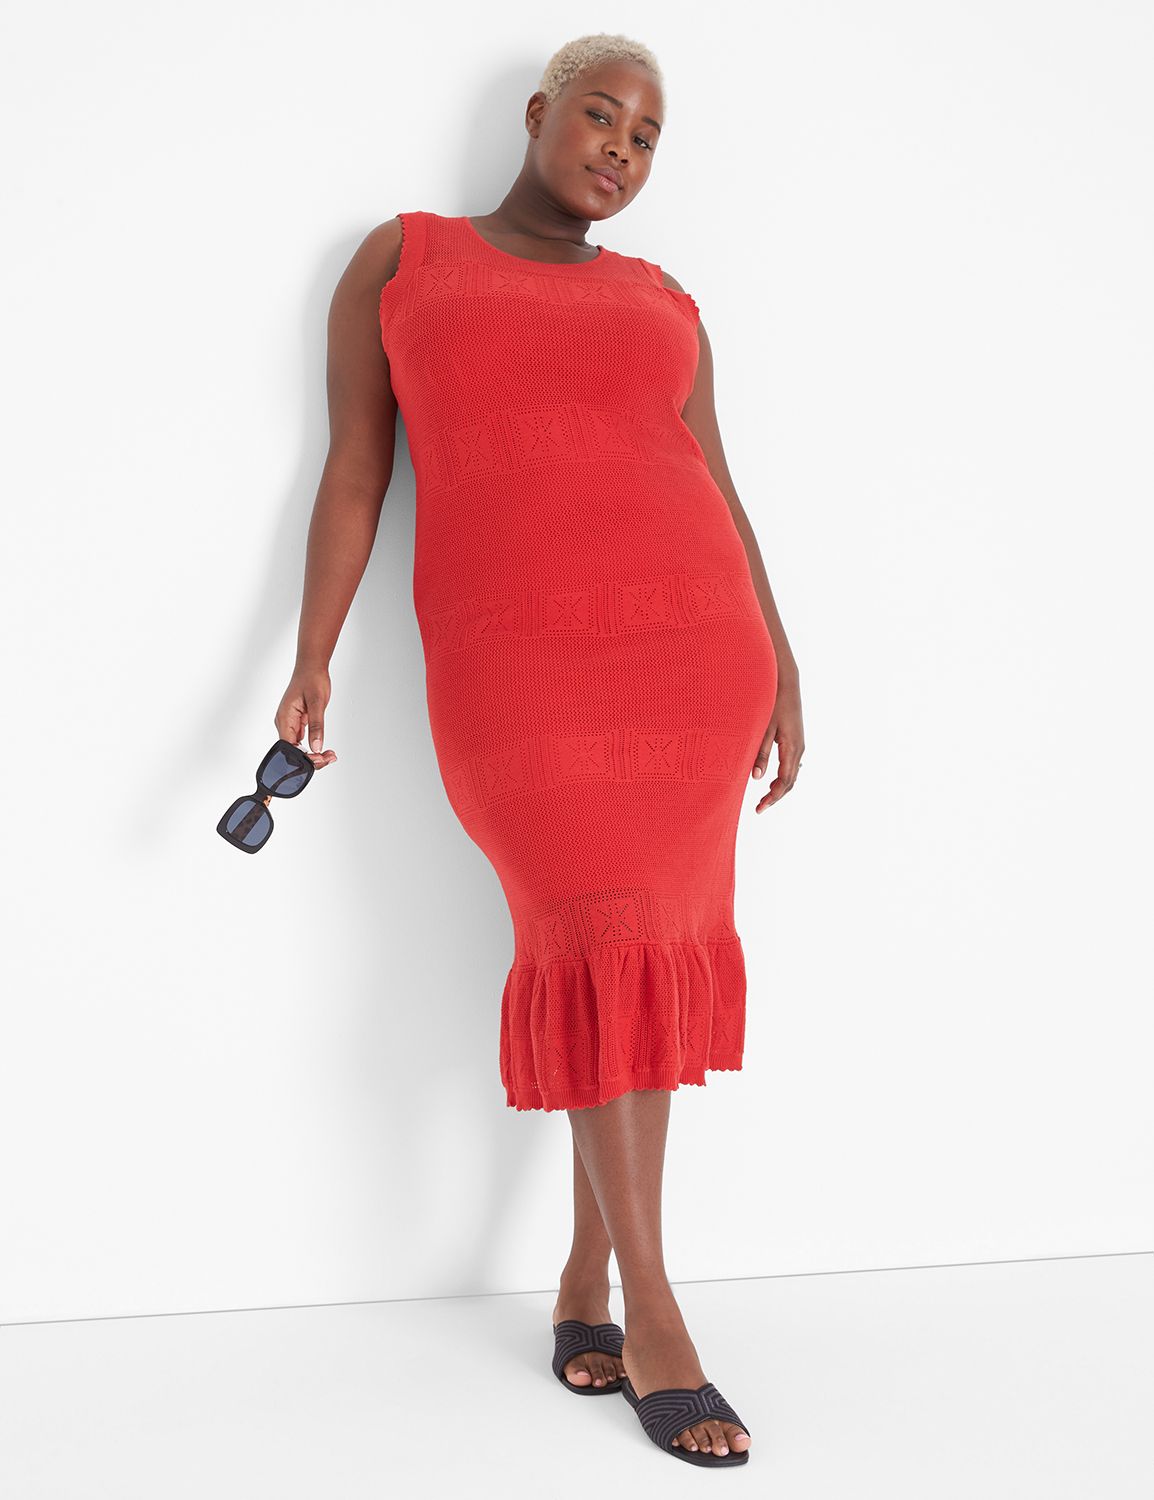 Clearance Plus Size Dresses & Skirts - On Sale | Lane Bryant